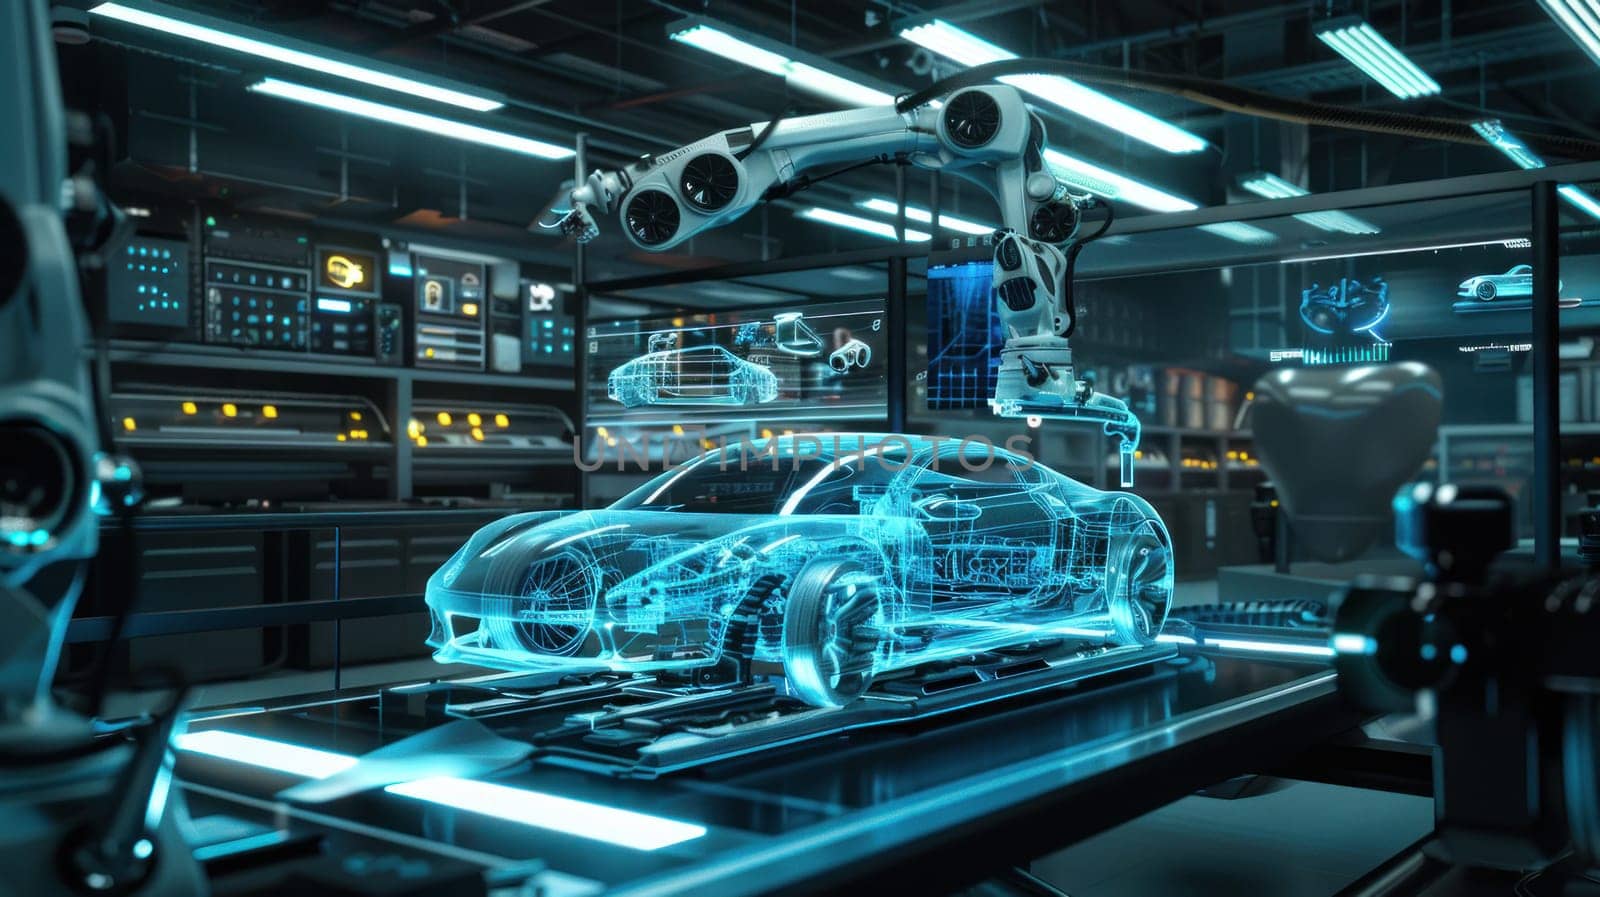 A futuristic car is being built in a factory. The car is made of a combination of metal and plastic, and it is being assembled by a robot. The robot is surrounded by several other robots